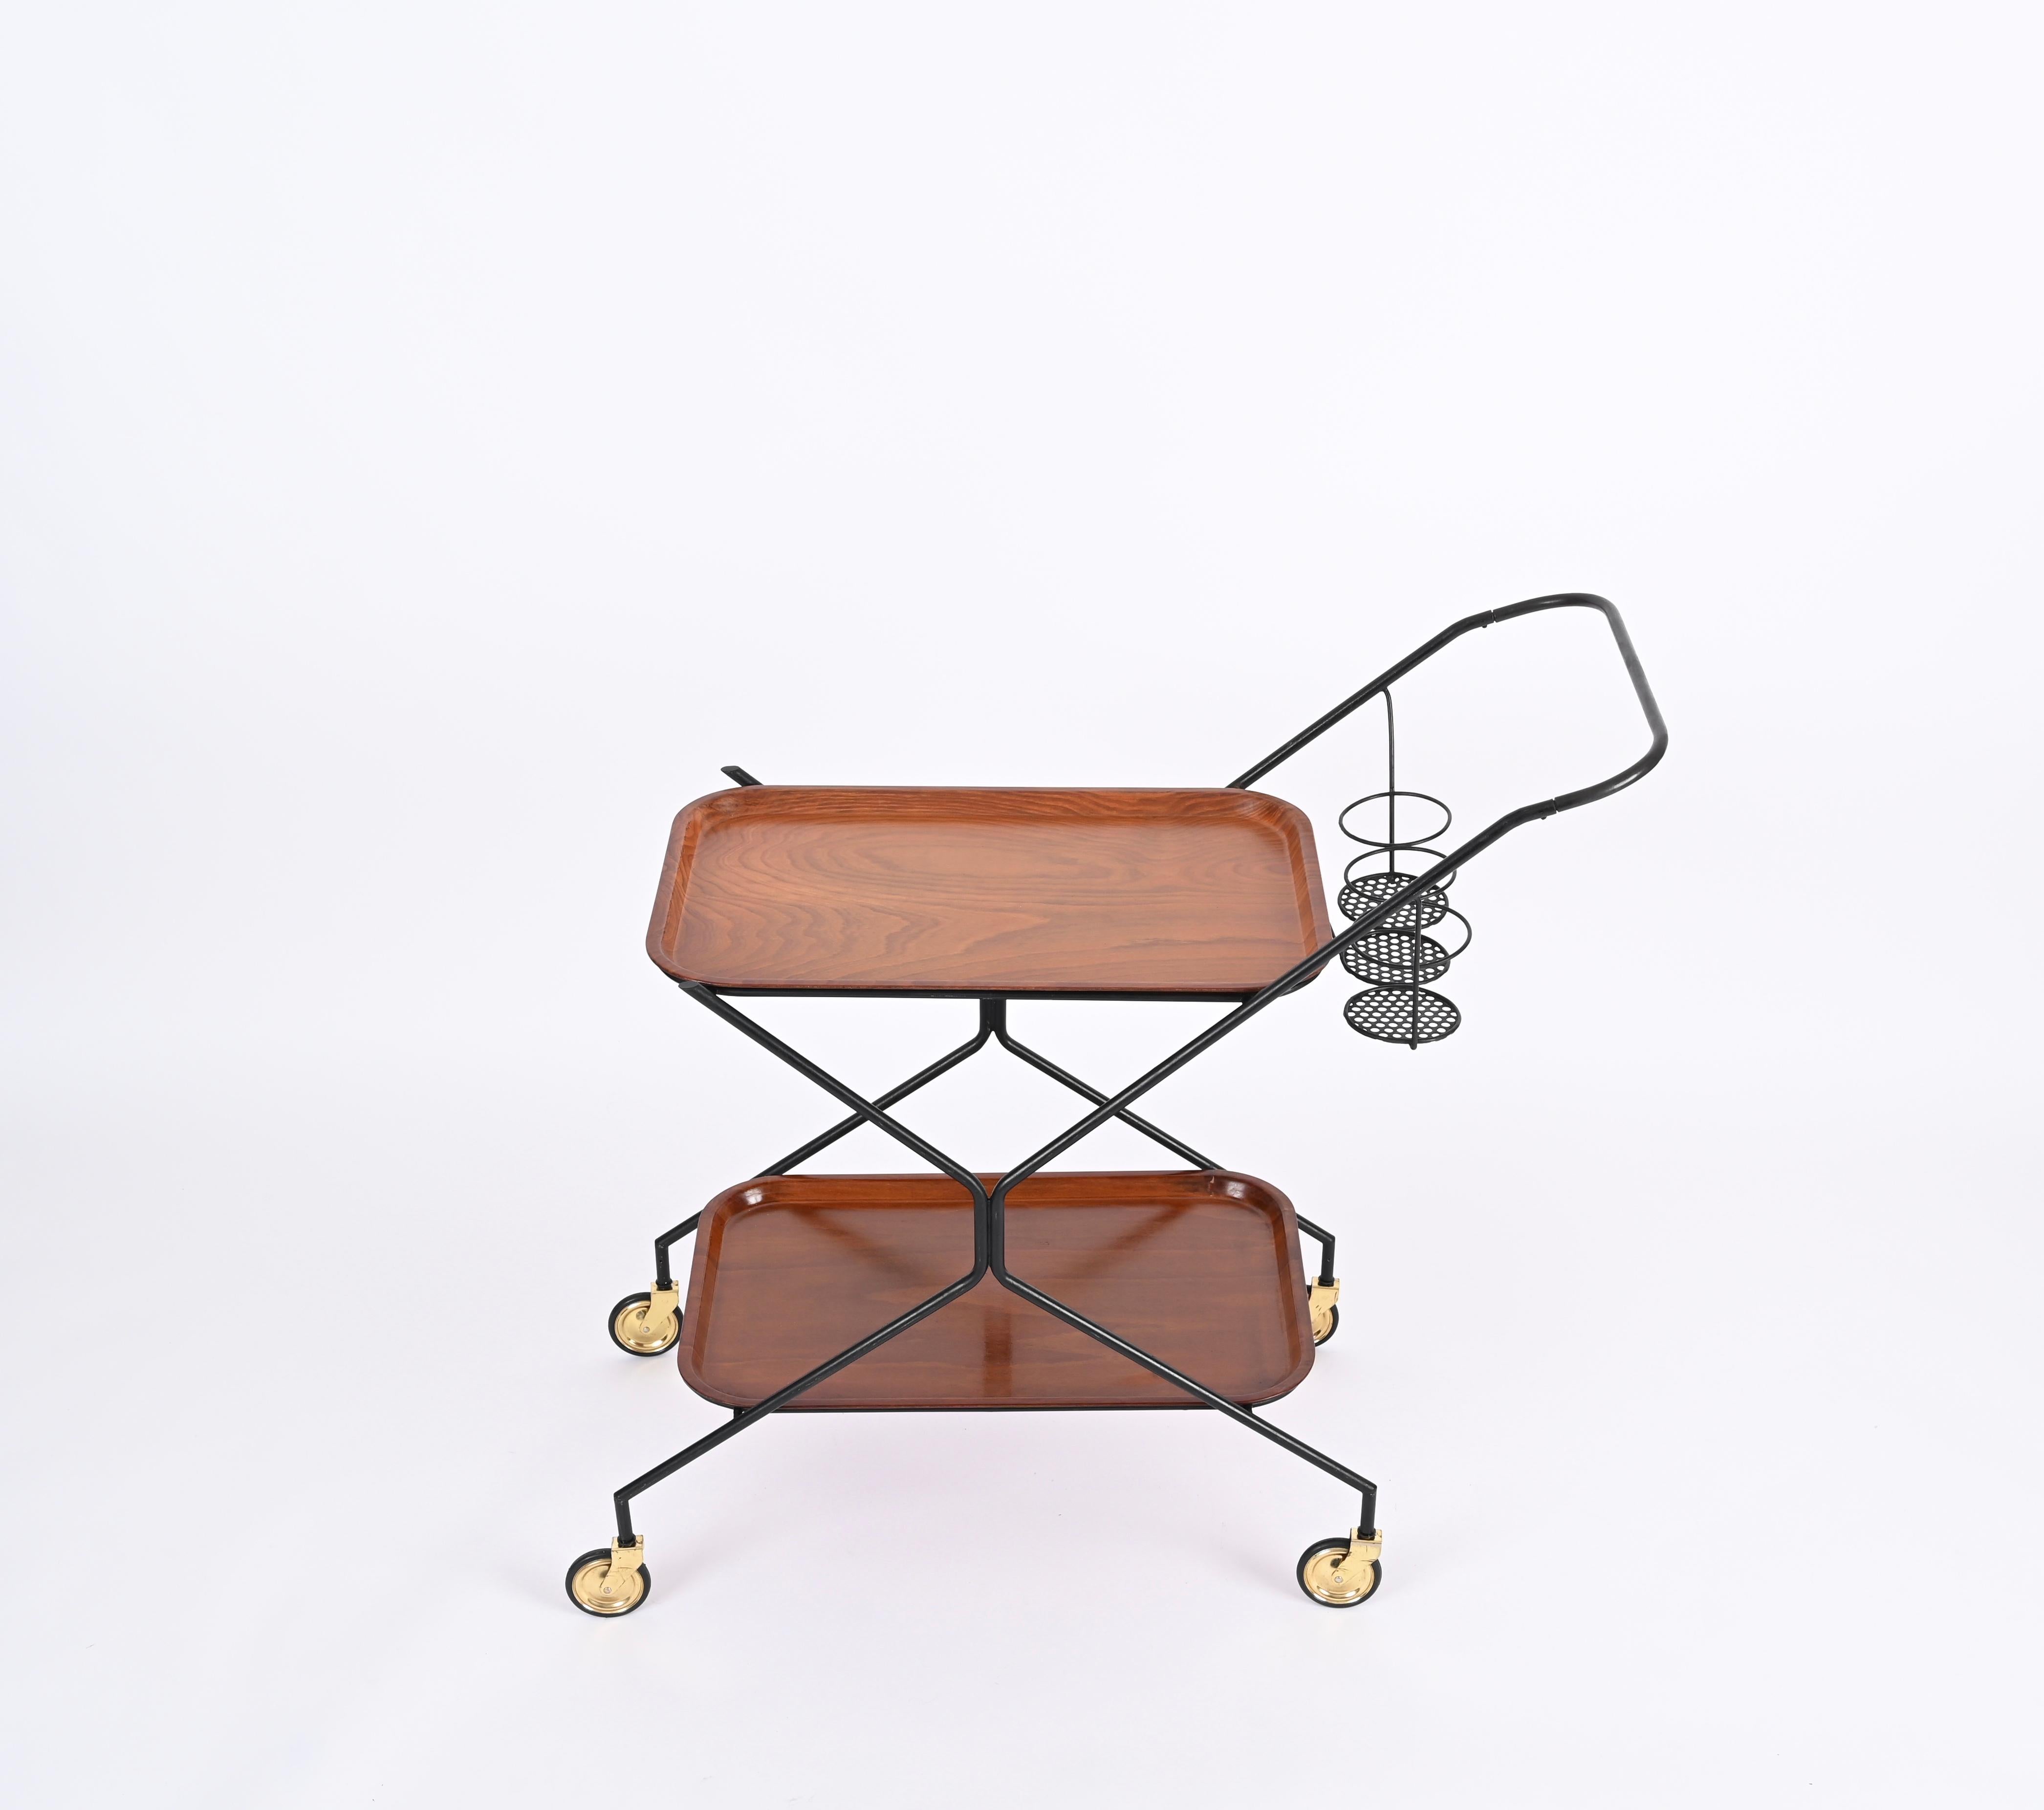 Enameled Italian Serving Bar Cart with Bottle Holder, Wood, Metal and Brass, Italy, 1960s For Sale